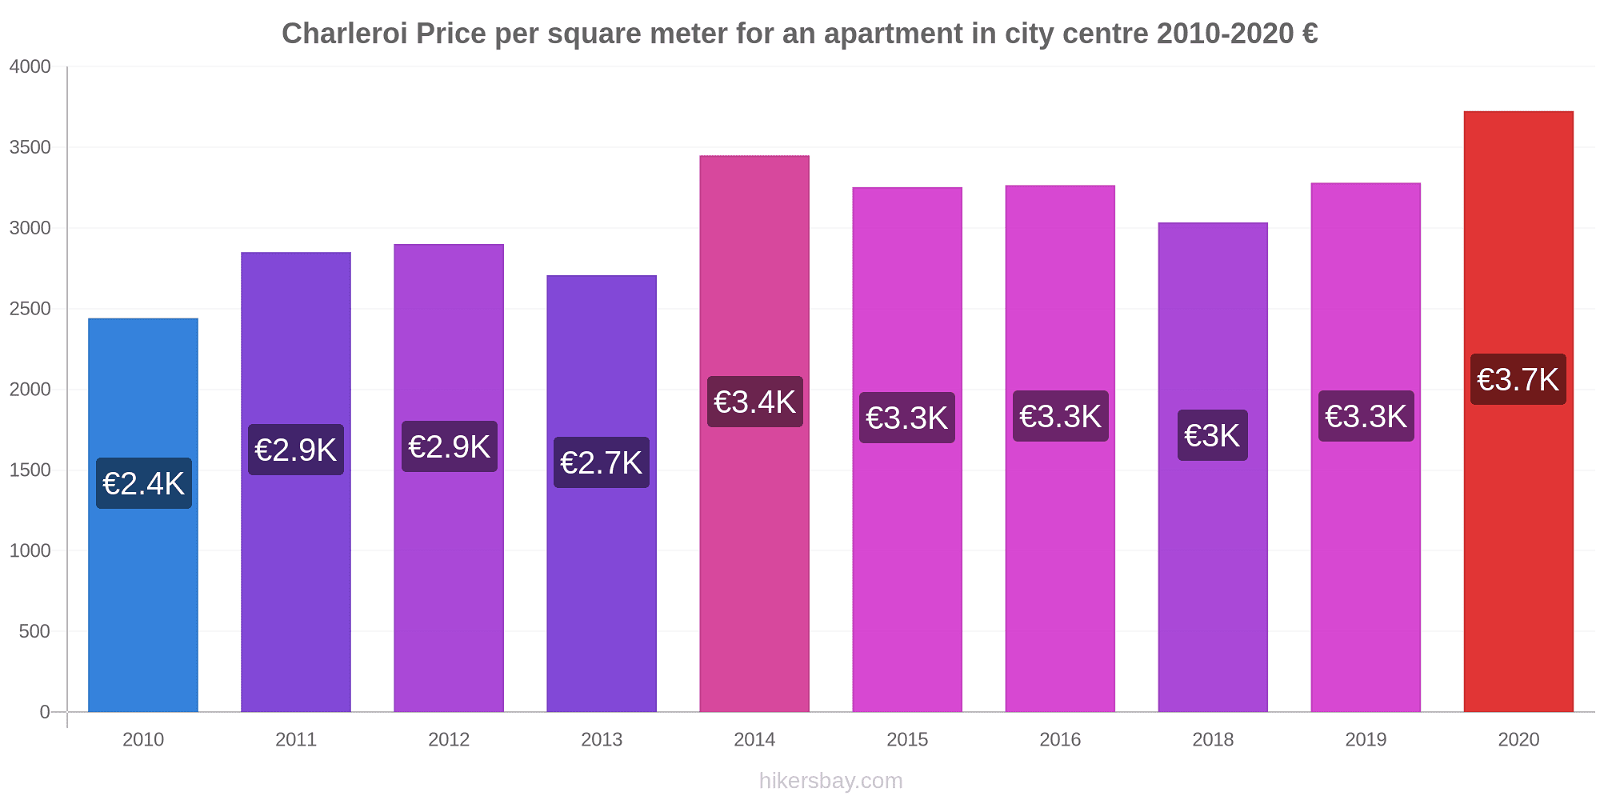 Charleroi price changes Price per square meter for an apartment in city centre hikersbay.com